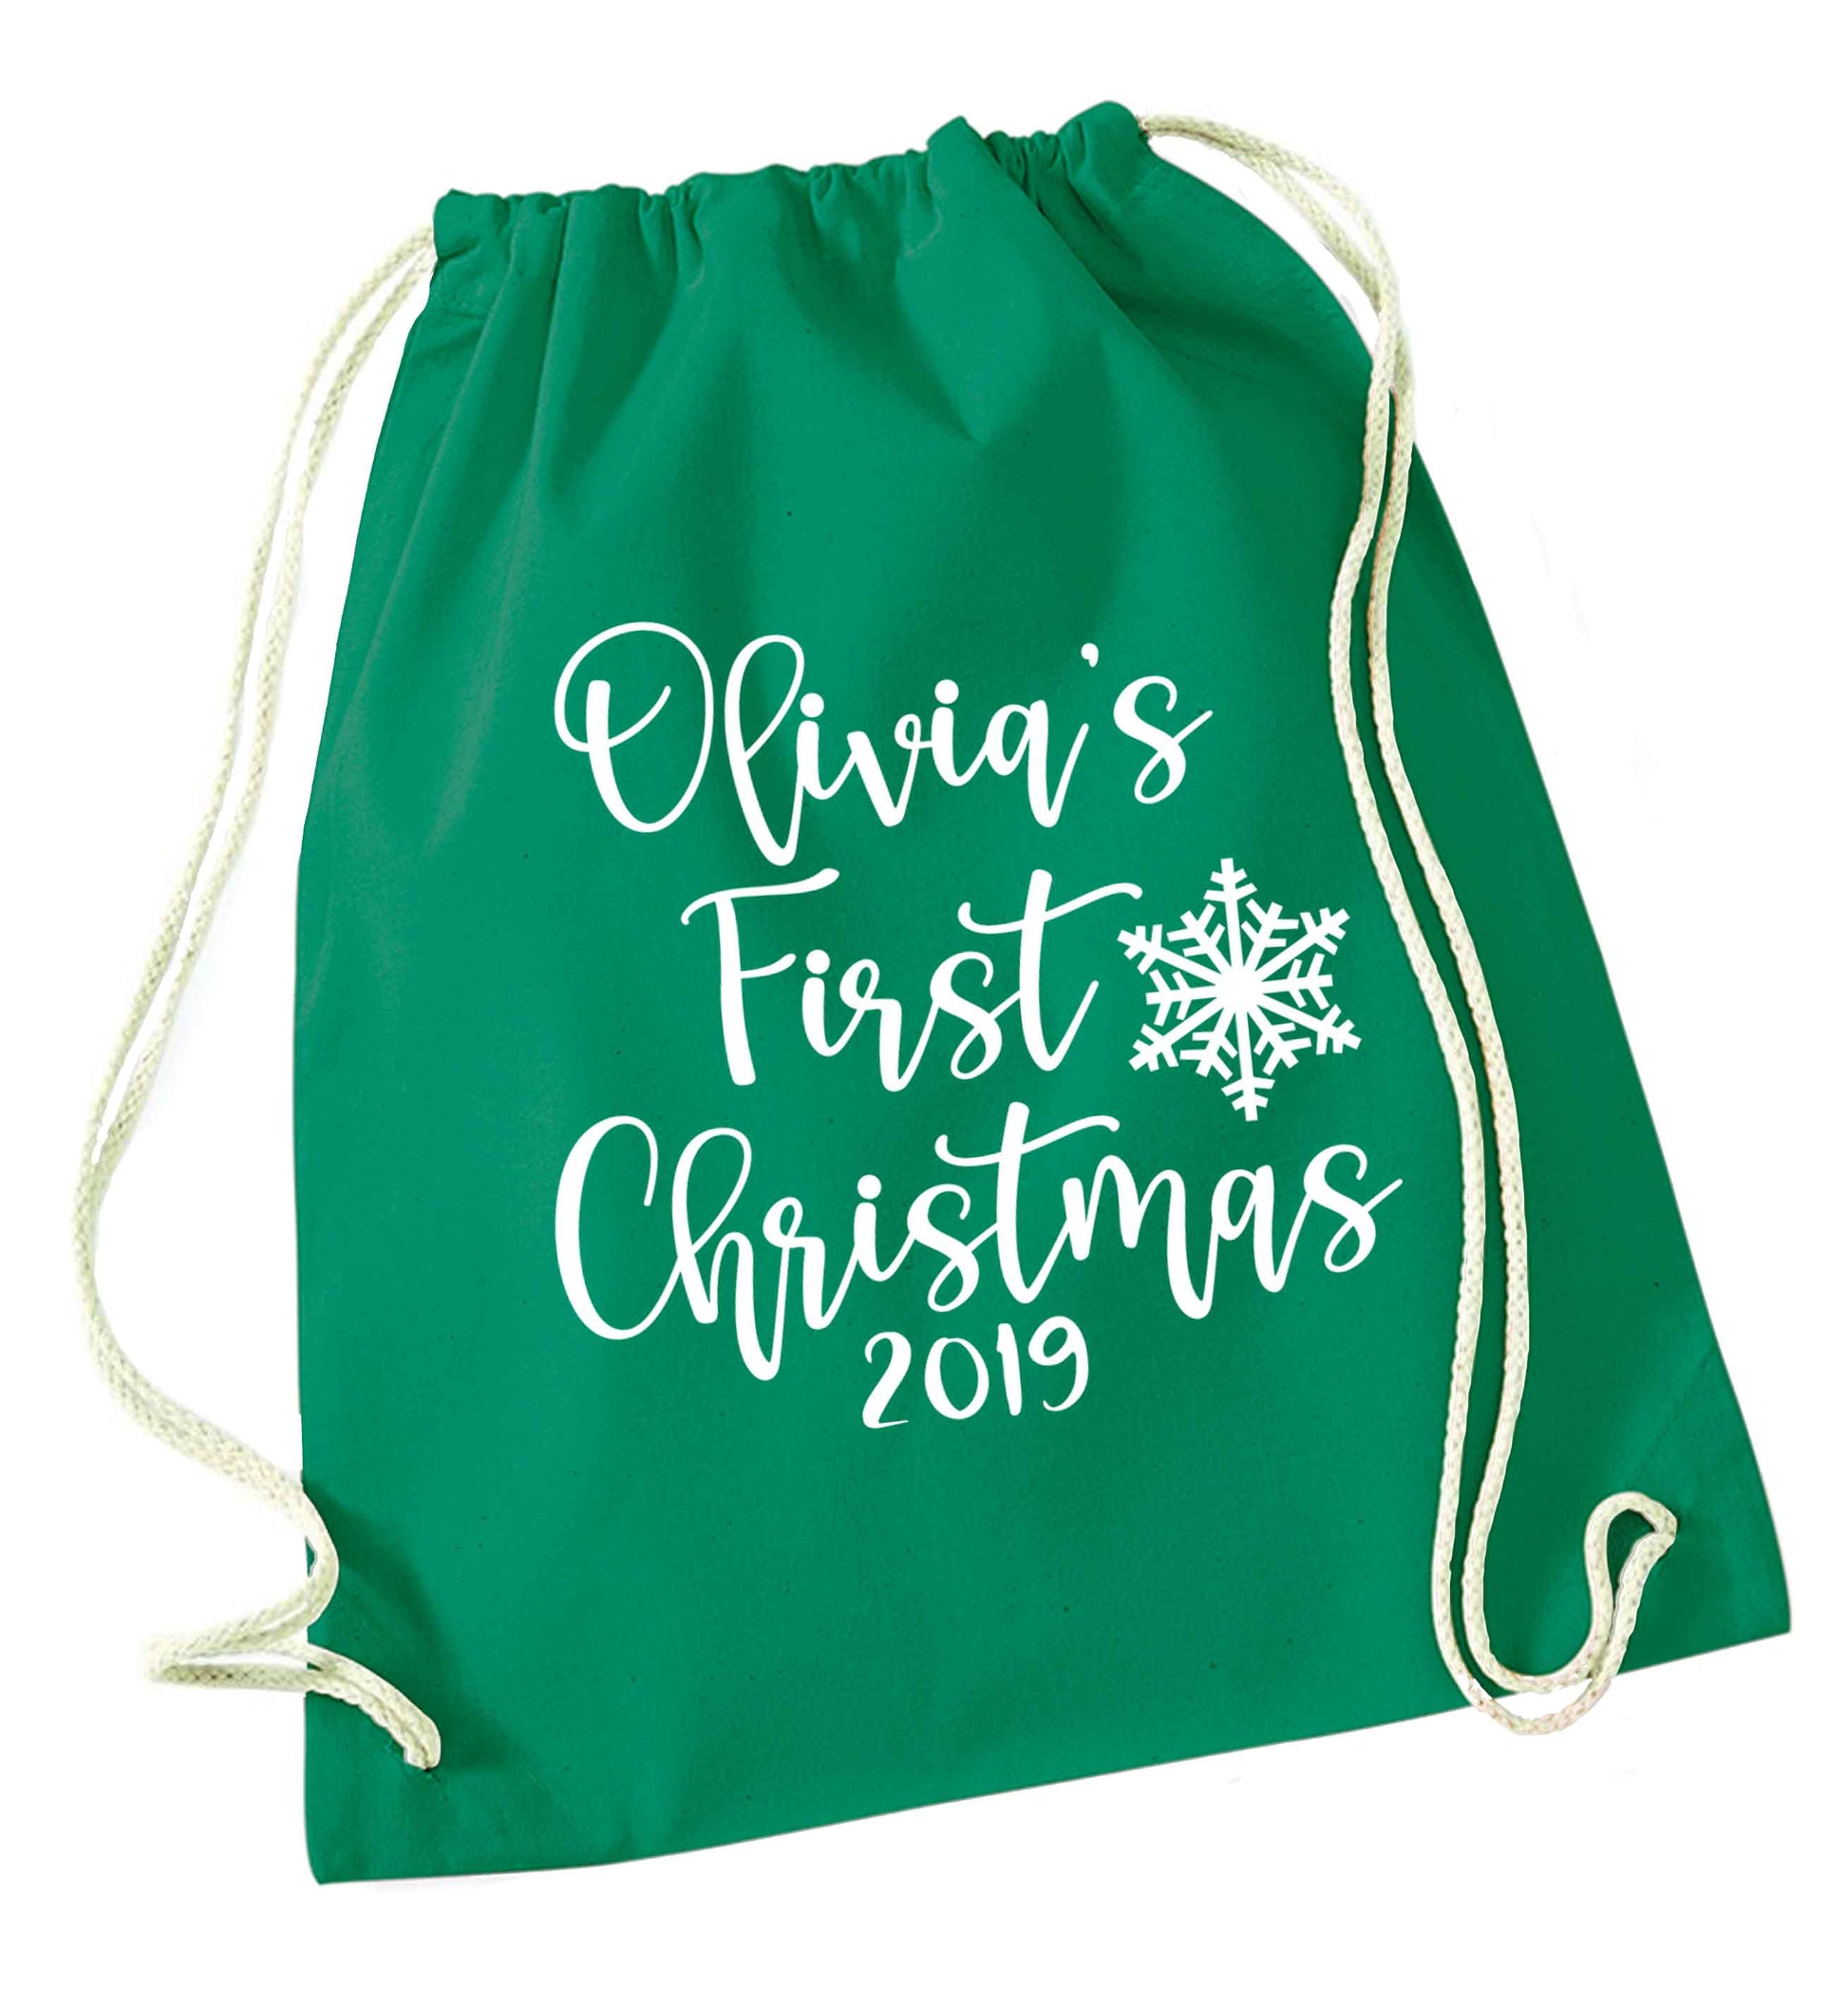 Personalised first Christmas - script text green drawstring bag